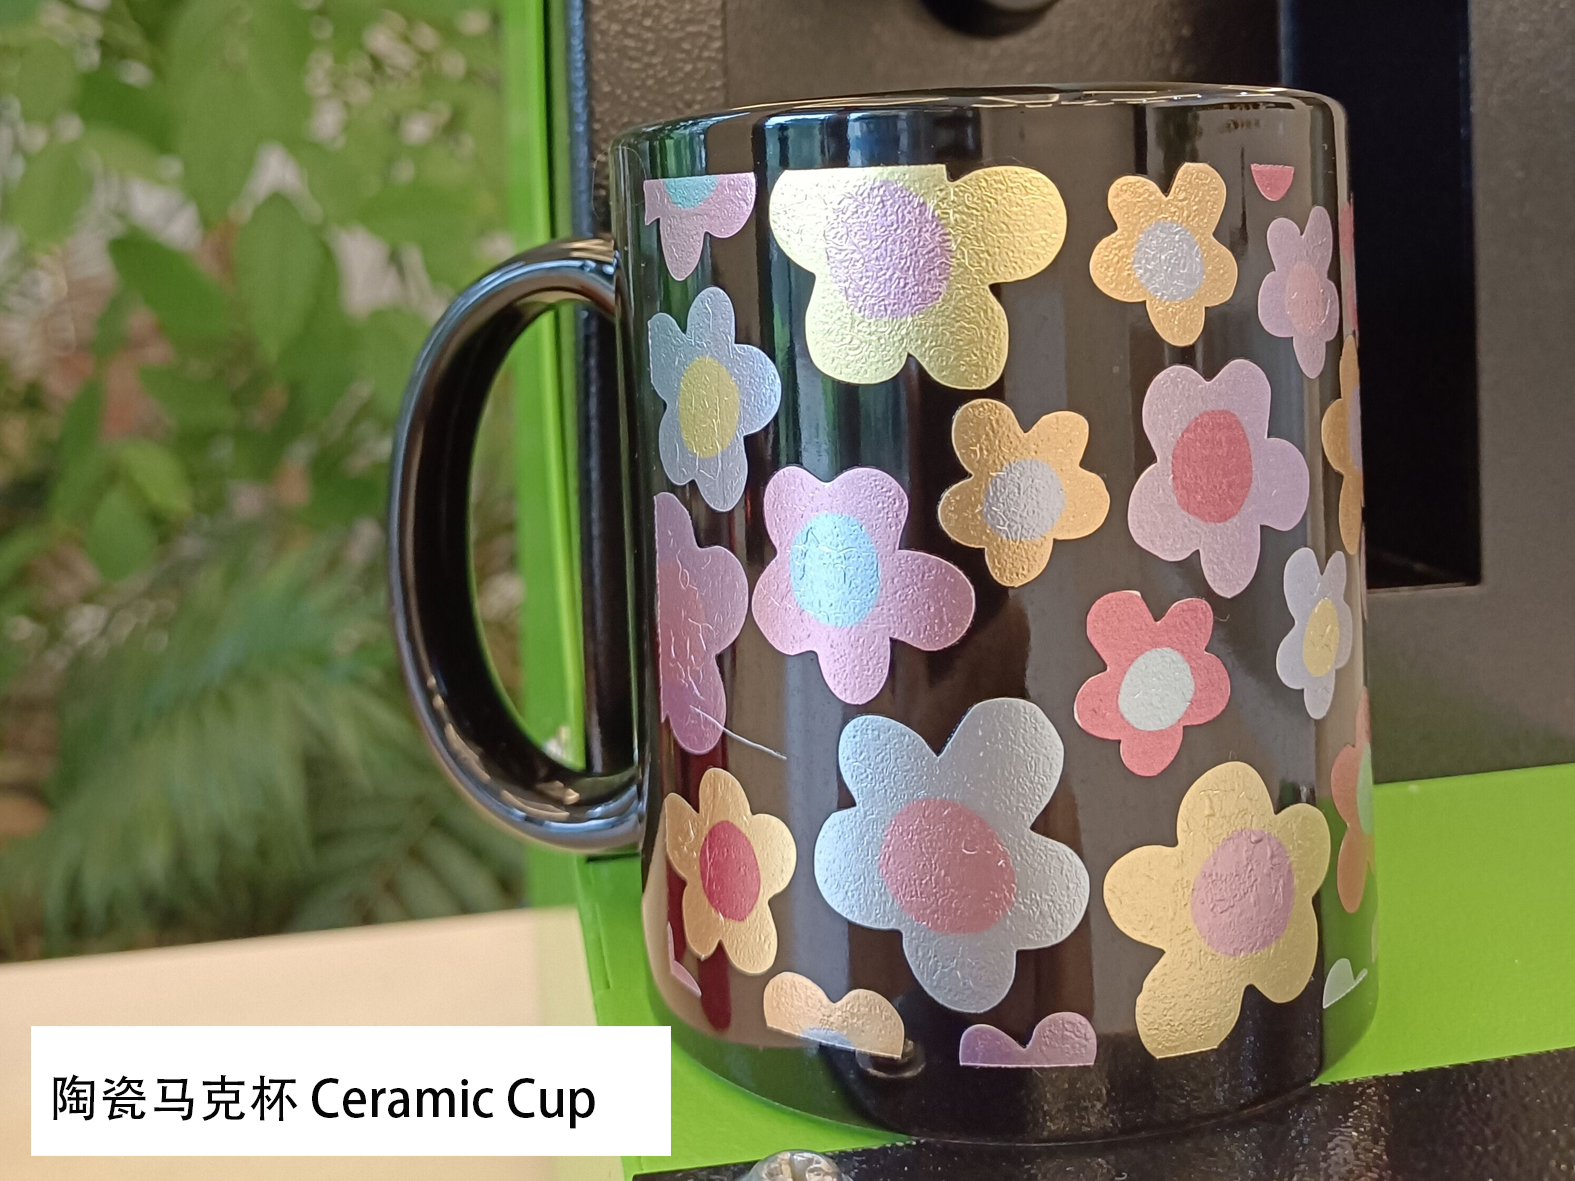 https://www.alizarinchina.com/solutions/which-investment-is-best-for-beginner-to-make-the-colorful-logo-of-ceramic-mug/